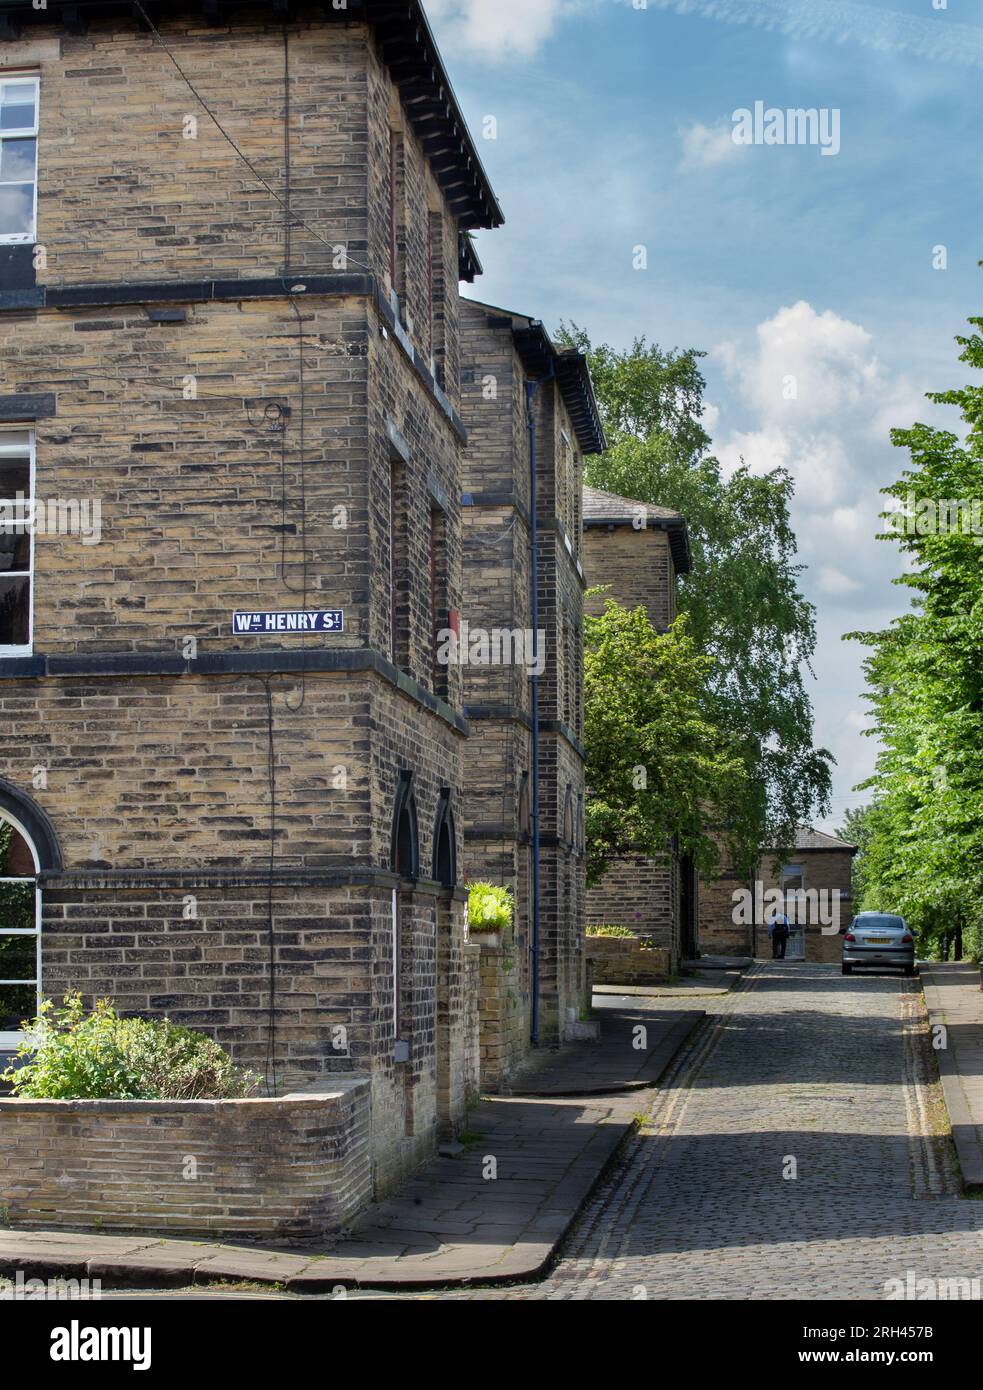 The corner of William Henry Street and cobbled  Albert Terrace in Saltaire, Yorkshire showing mill workers cottages from nearby Salts Mill. Stock Photo